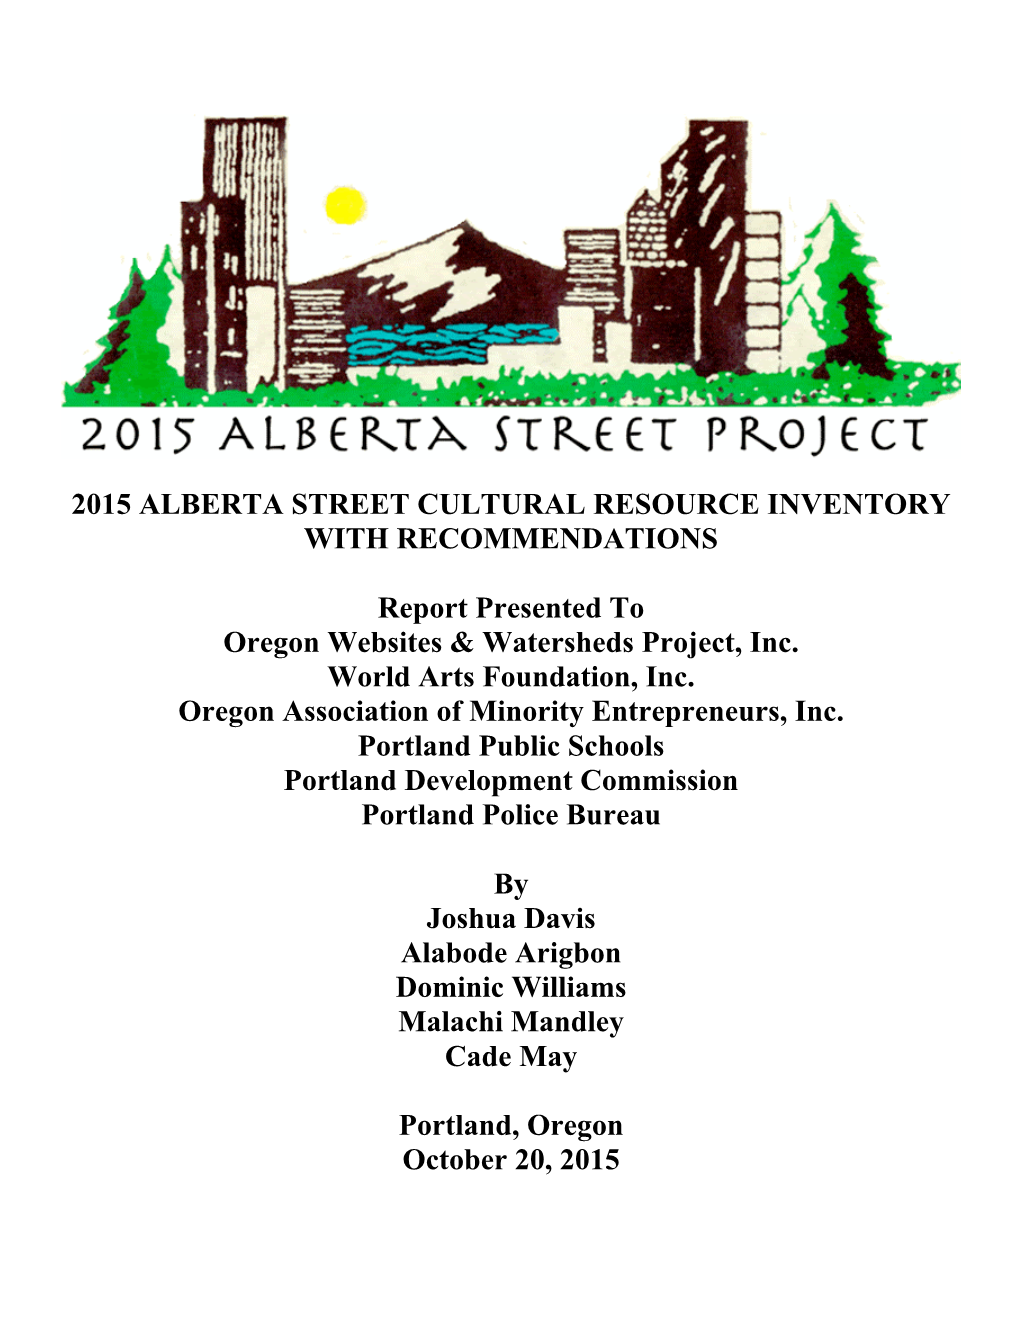 2015 Alberta Street Cultural Resource Inventory with Recommendations